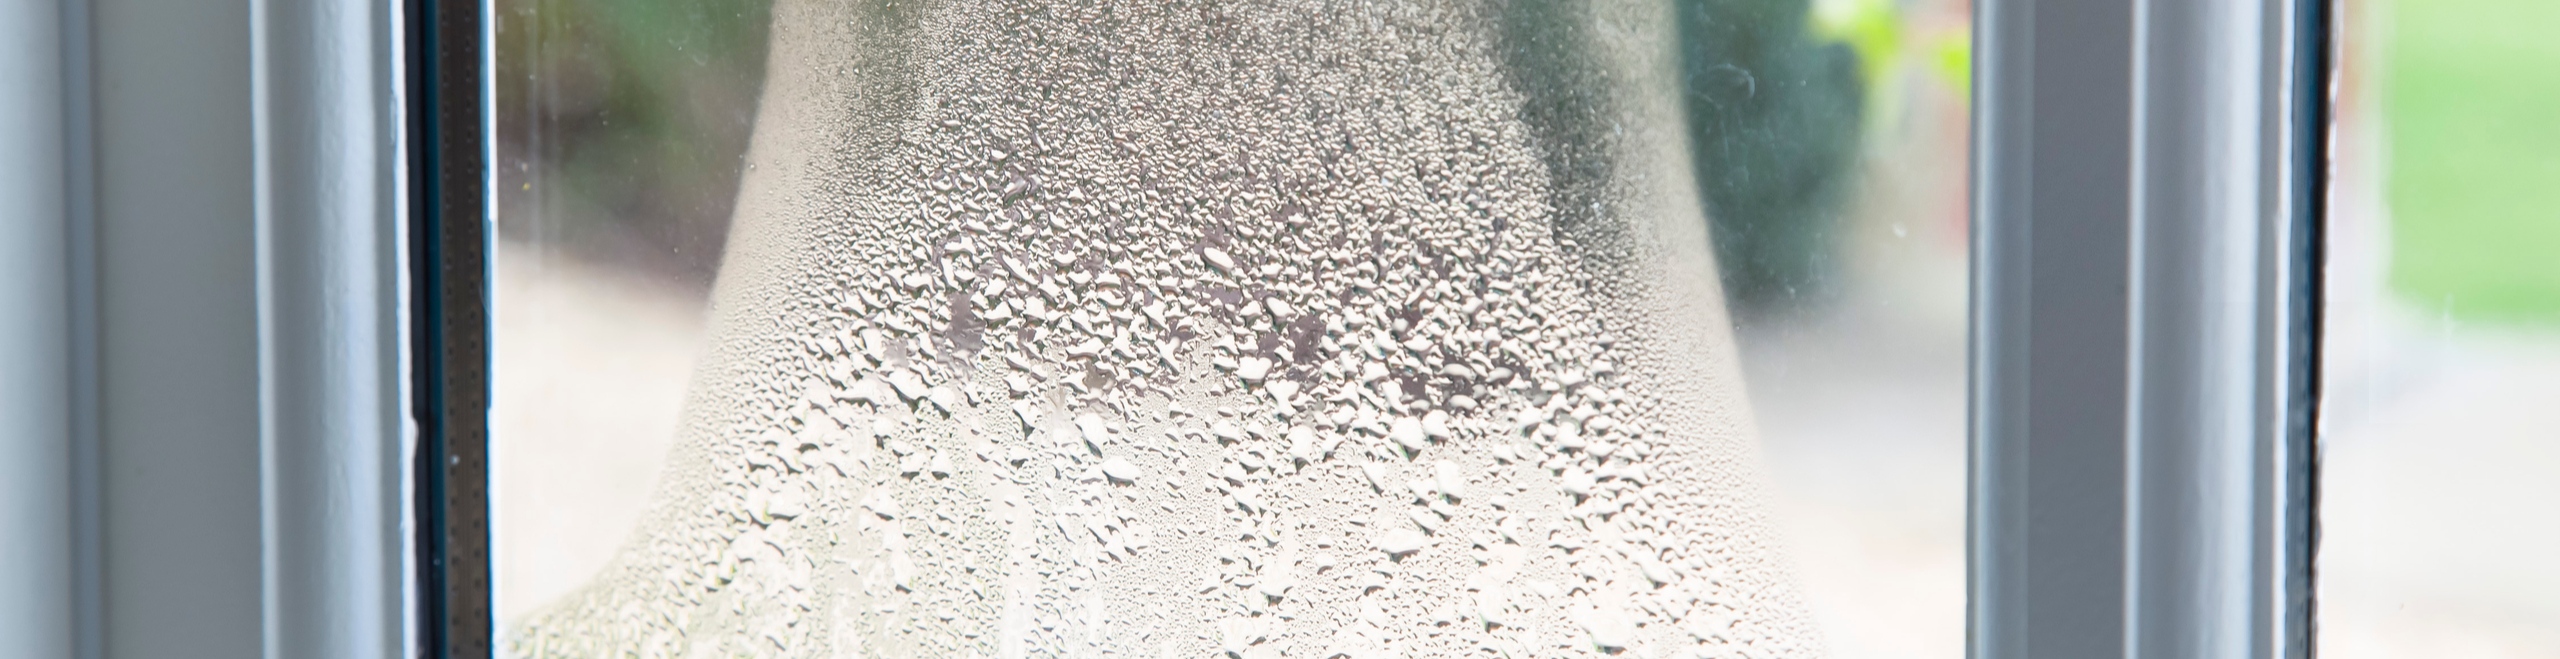 condensation collecting on window of home